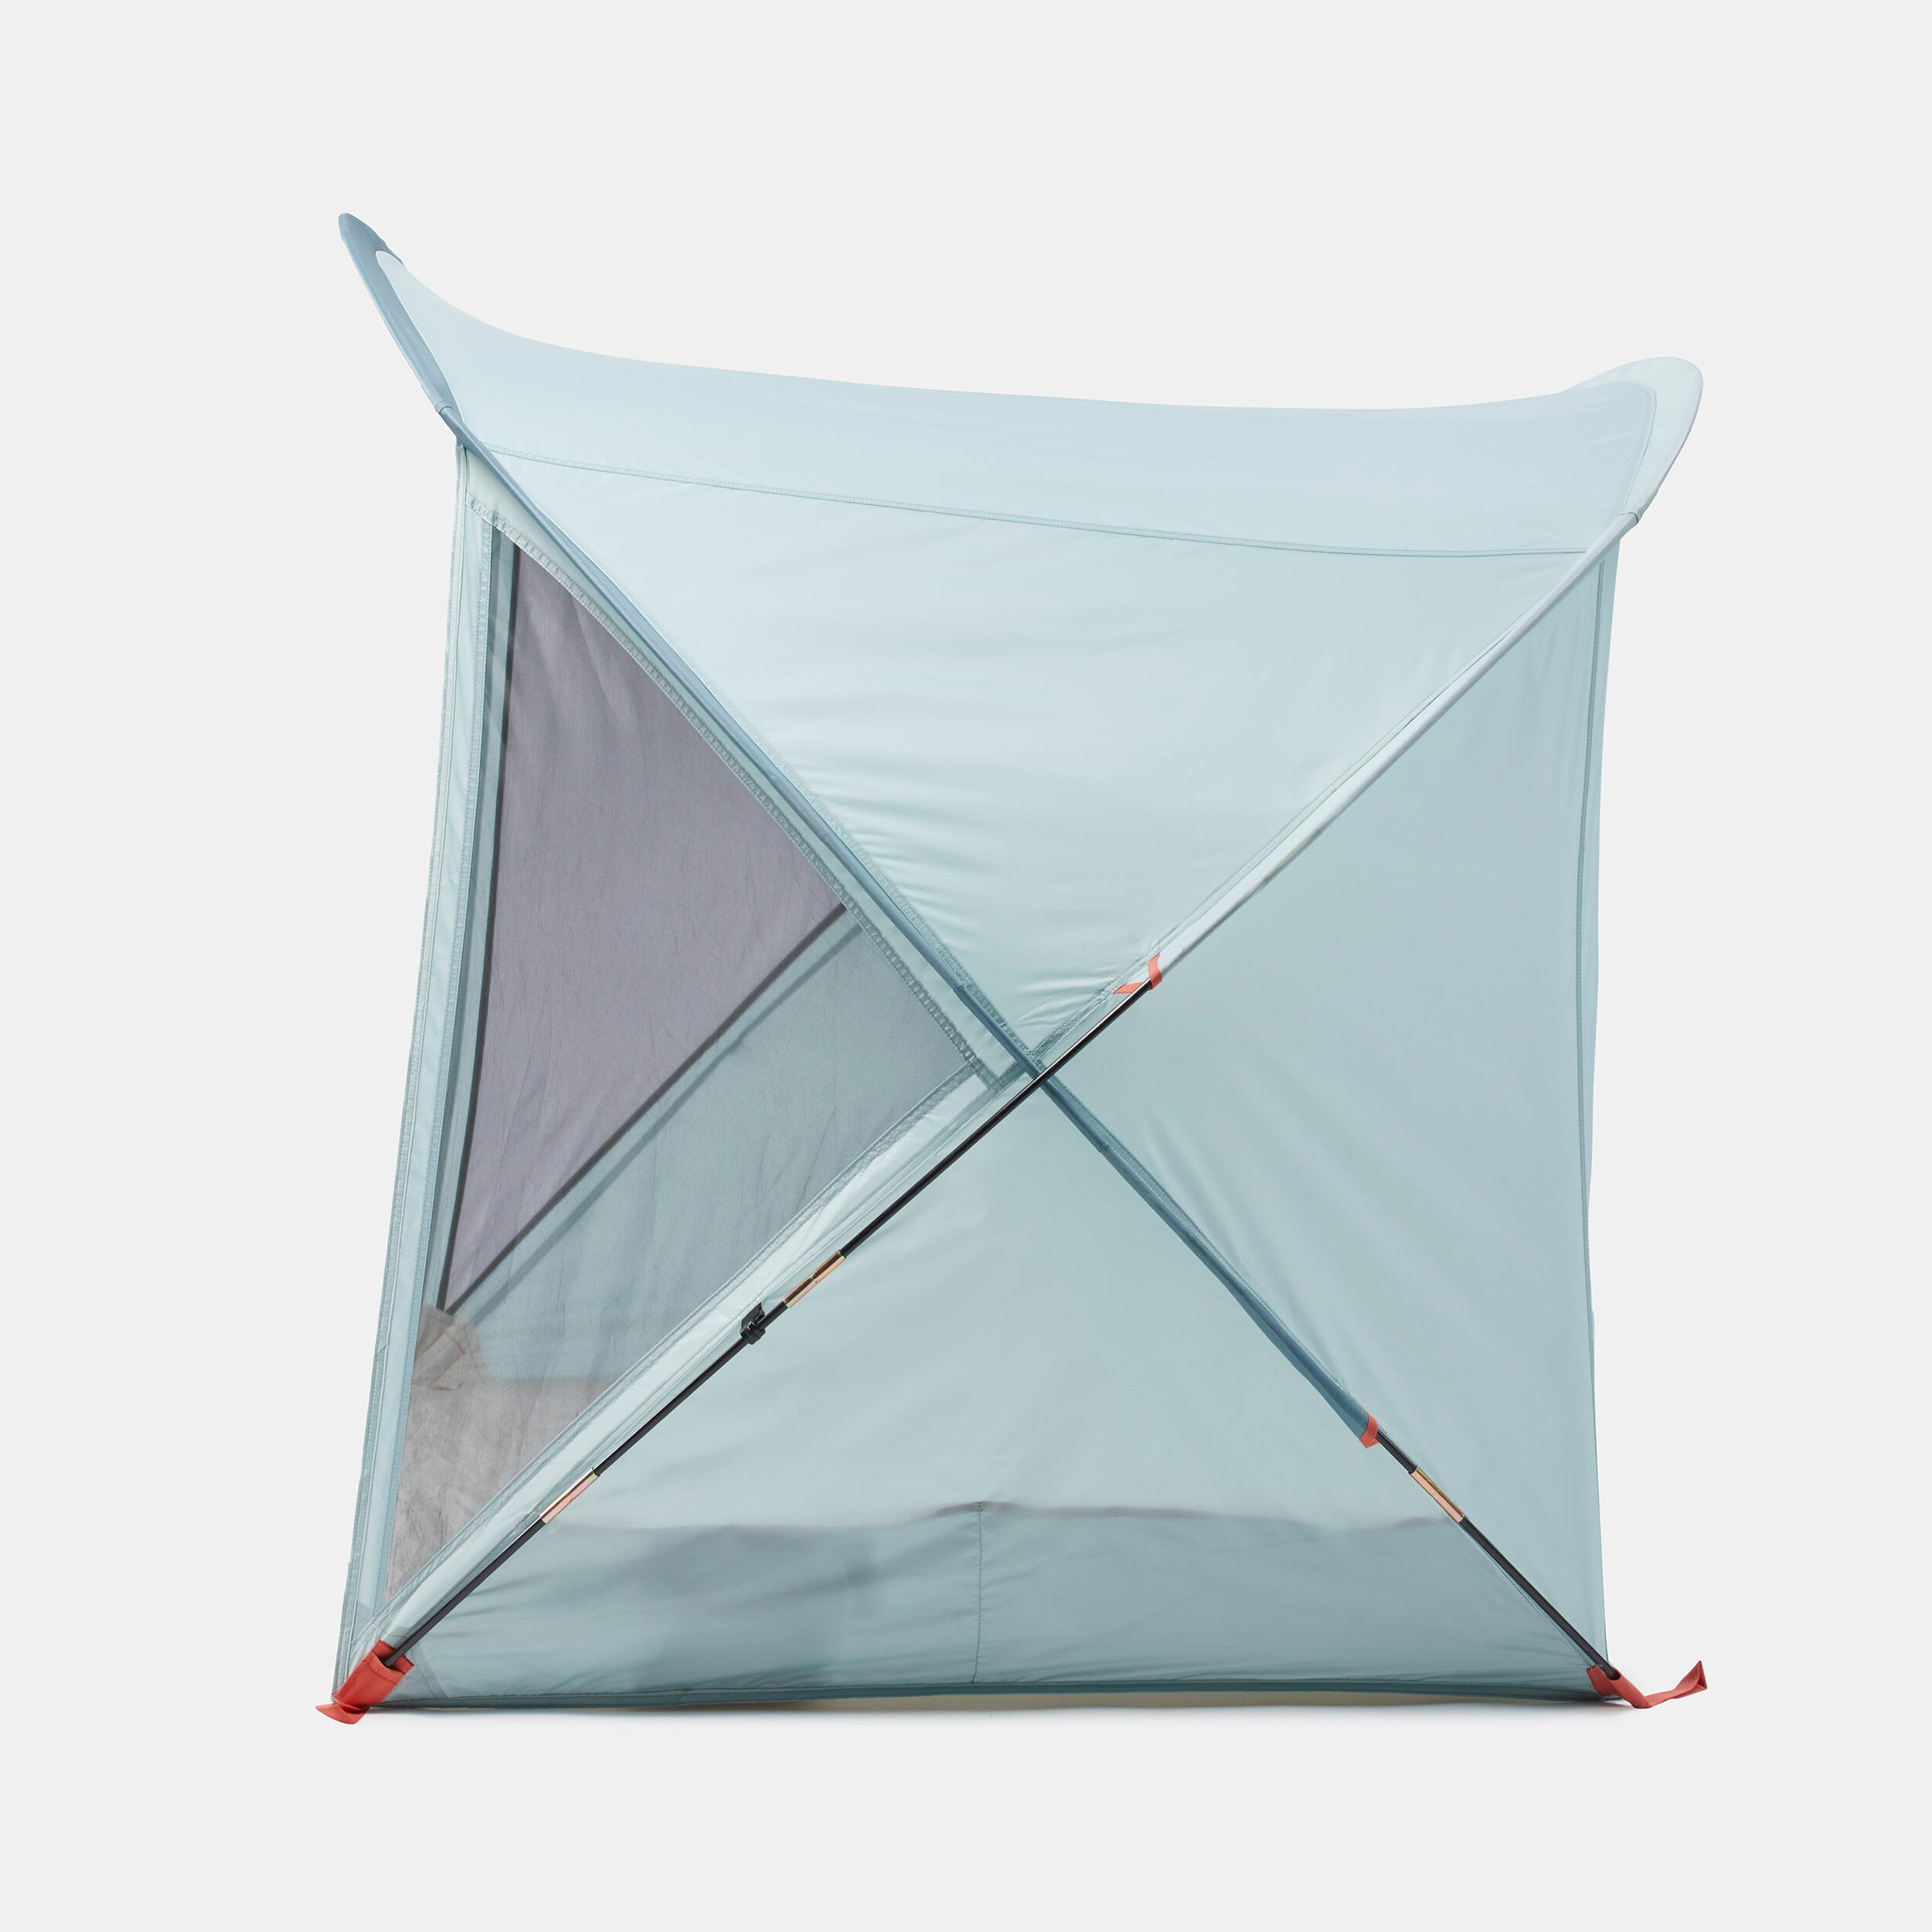 Camping Shelter with Poles - 4 person - Arpenaz 4P 5/10